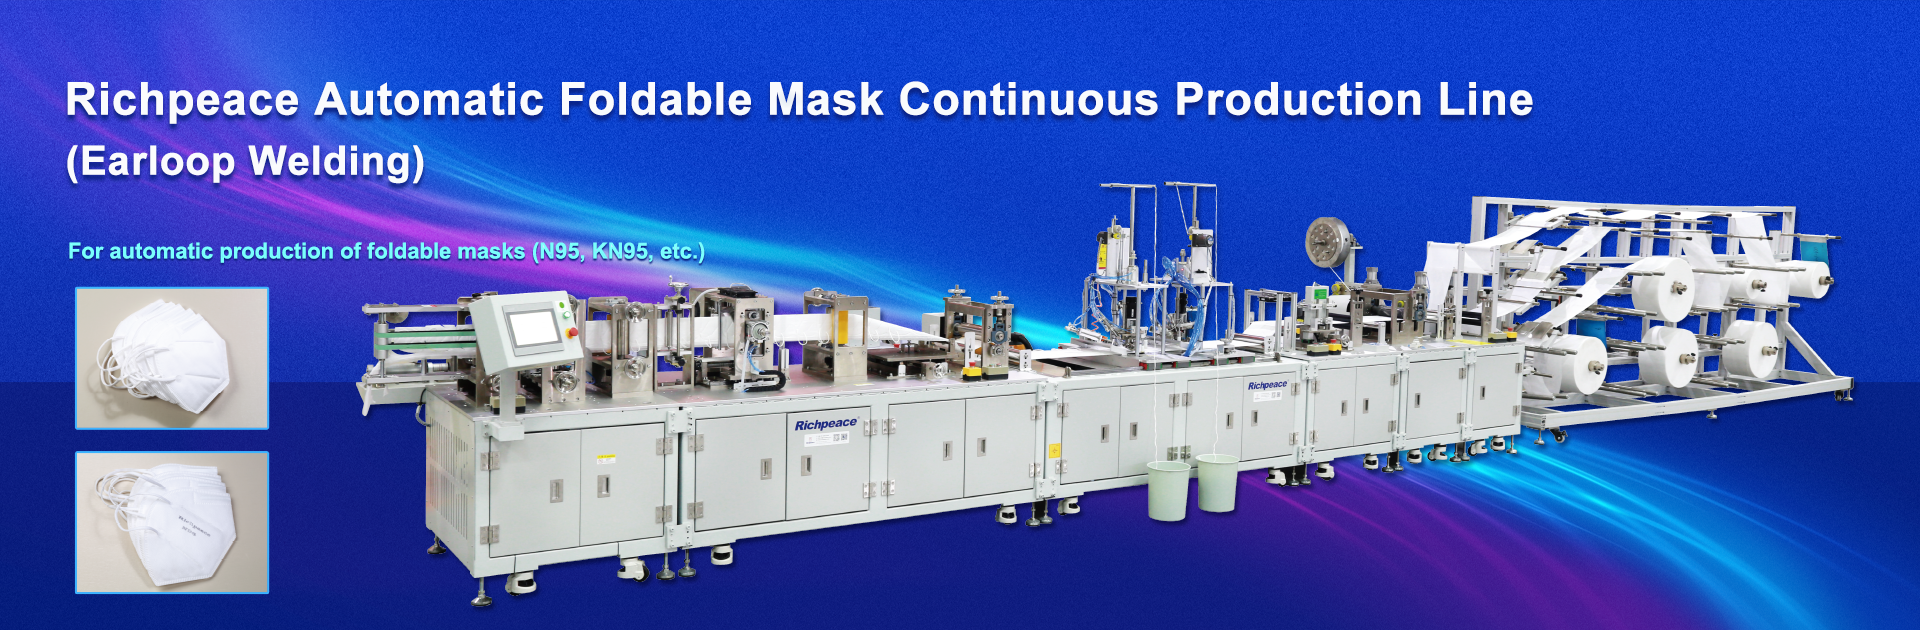 Foldable Mask Continuous Production Line (Earloop Welding)